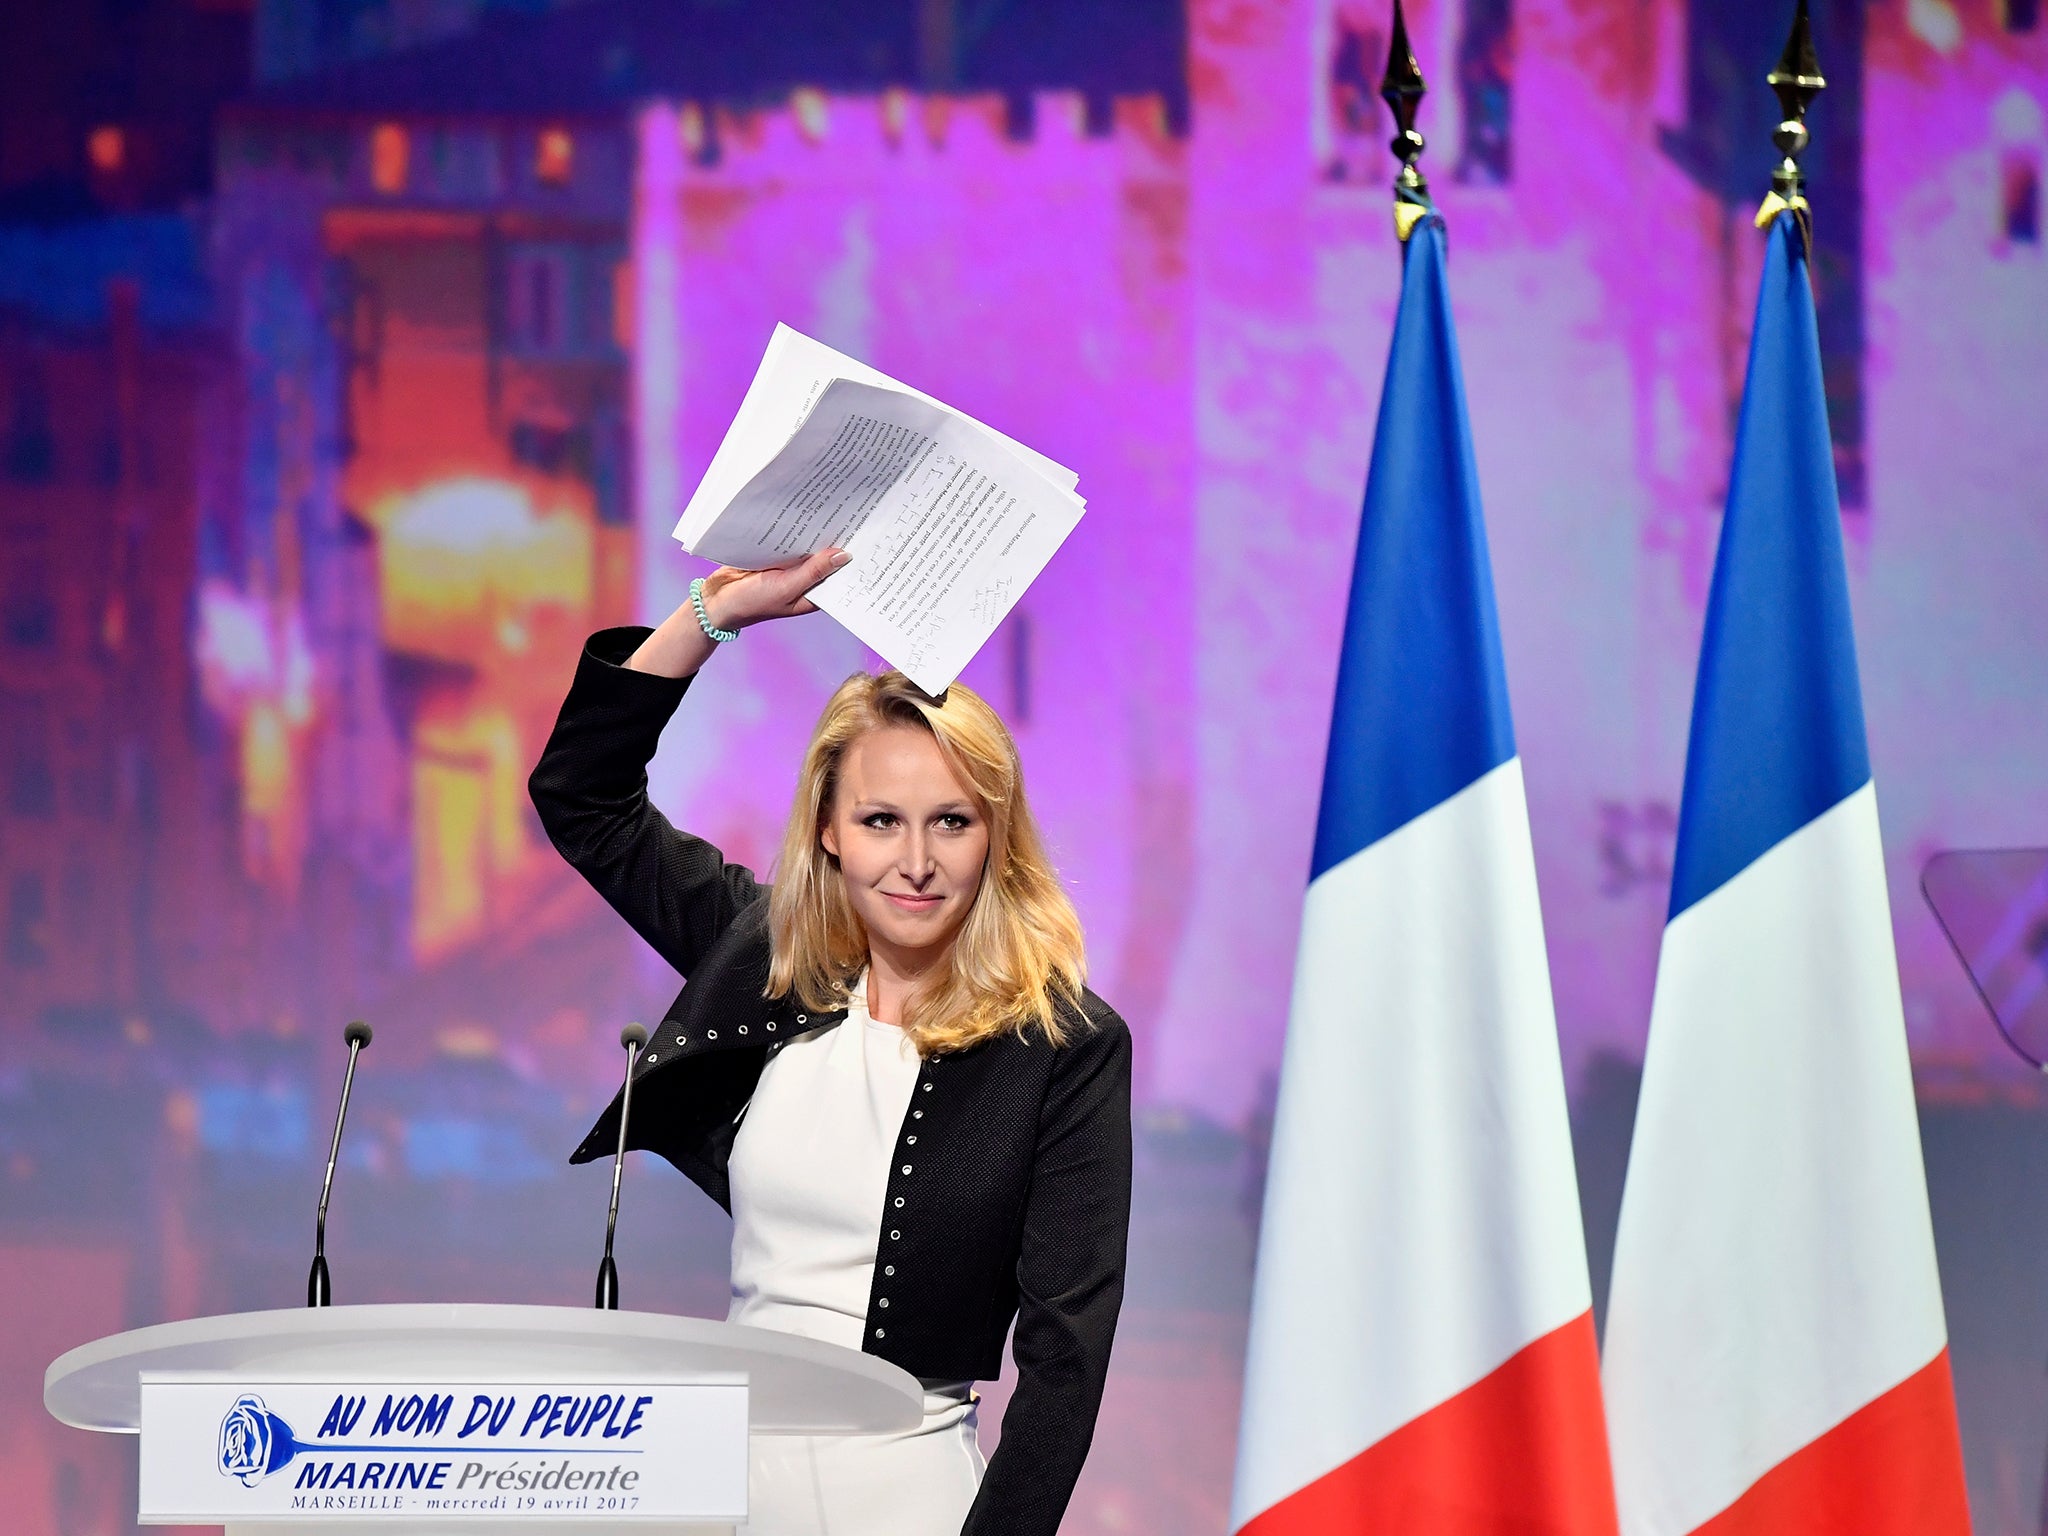 Marion Marechal Le Pen said she would not seek reelection in the June local election citing personal and political reasons